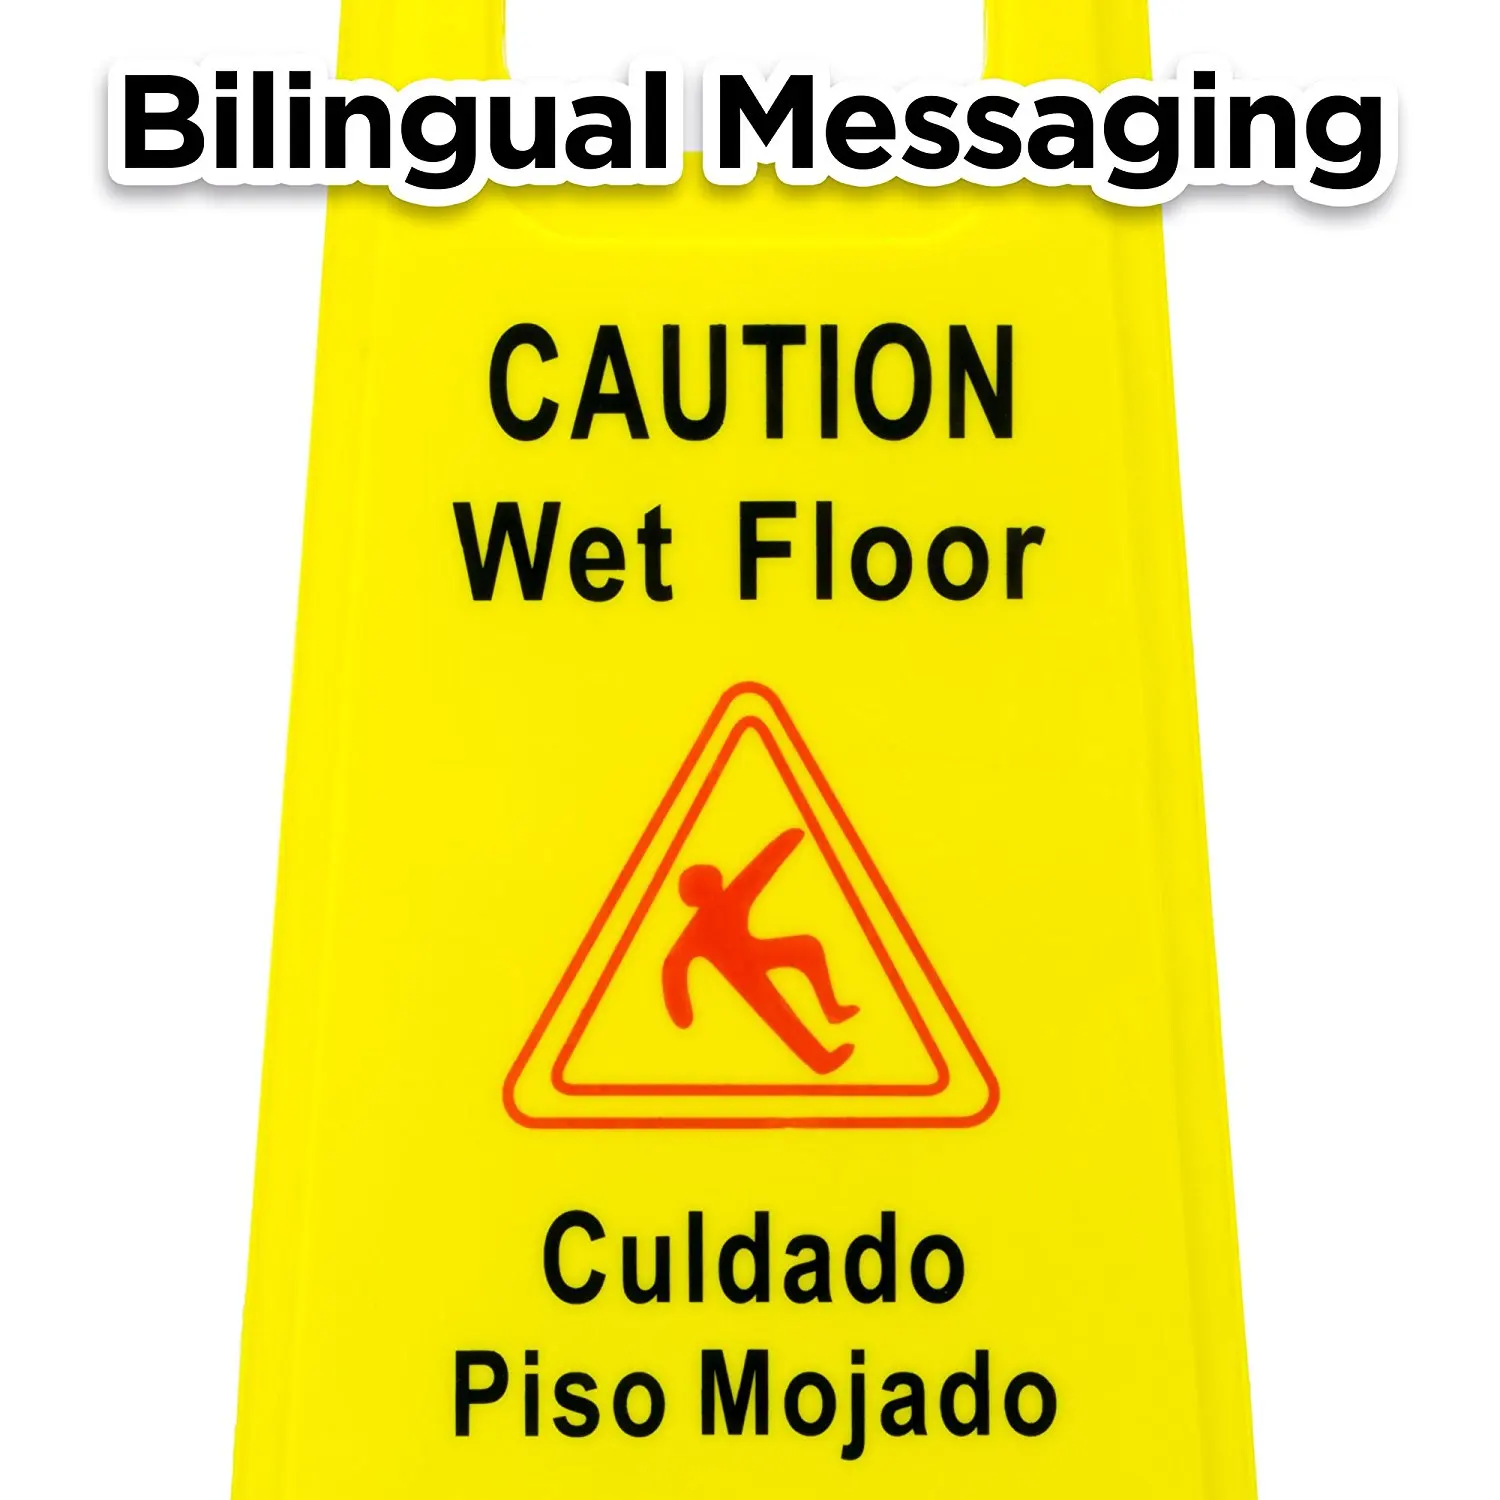 Yellow Plastic A Shape Caution Wet Floor Warning Sign Board